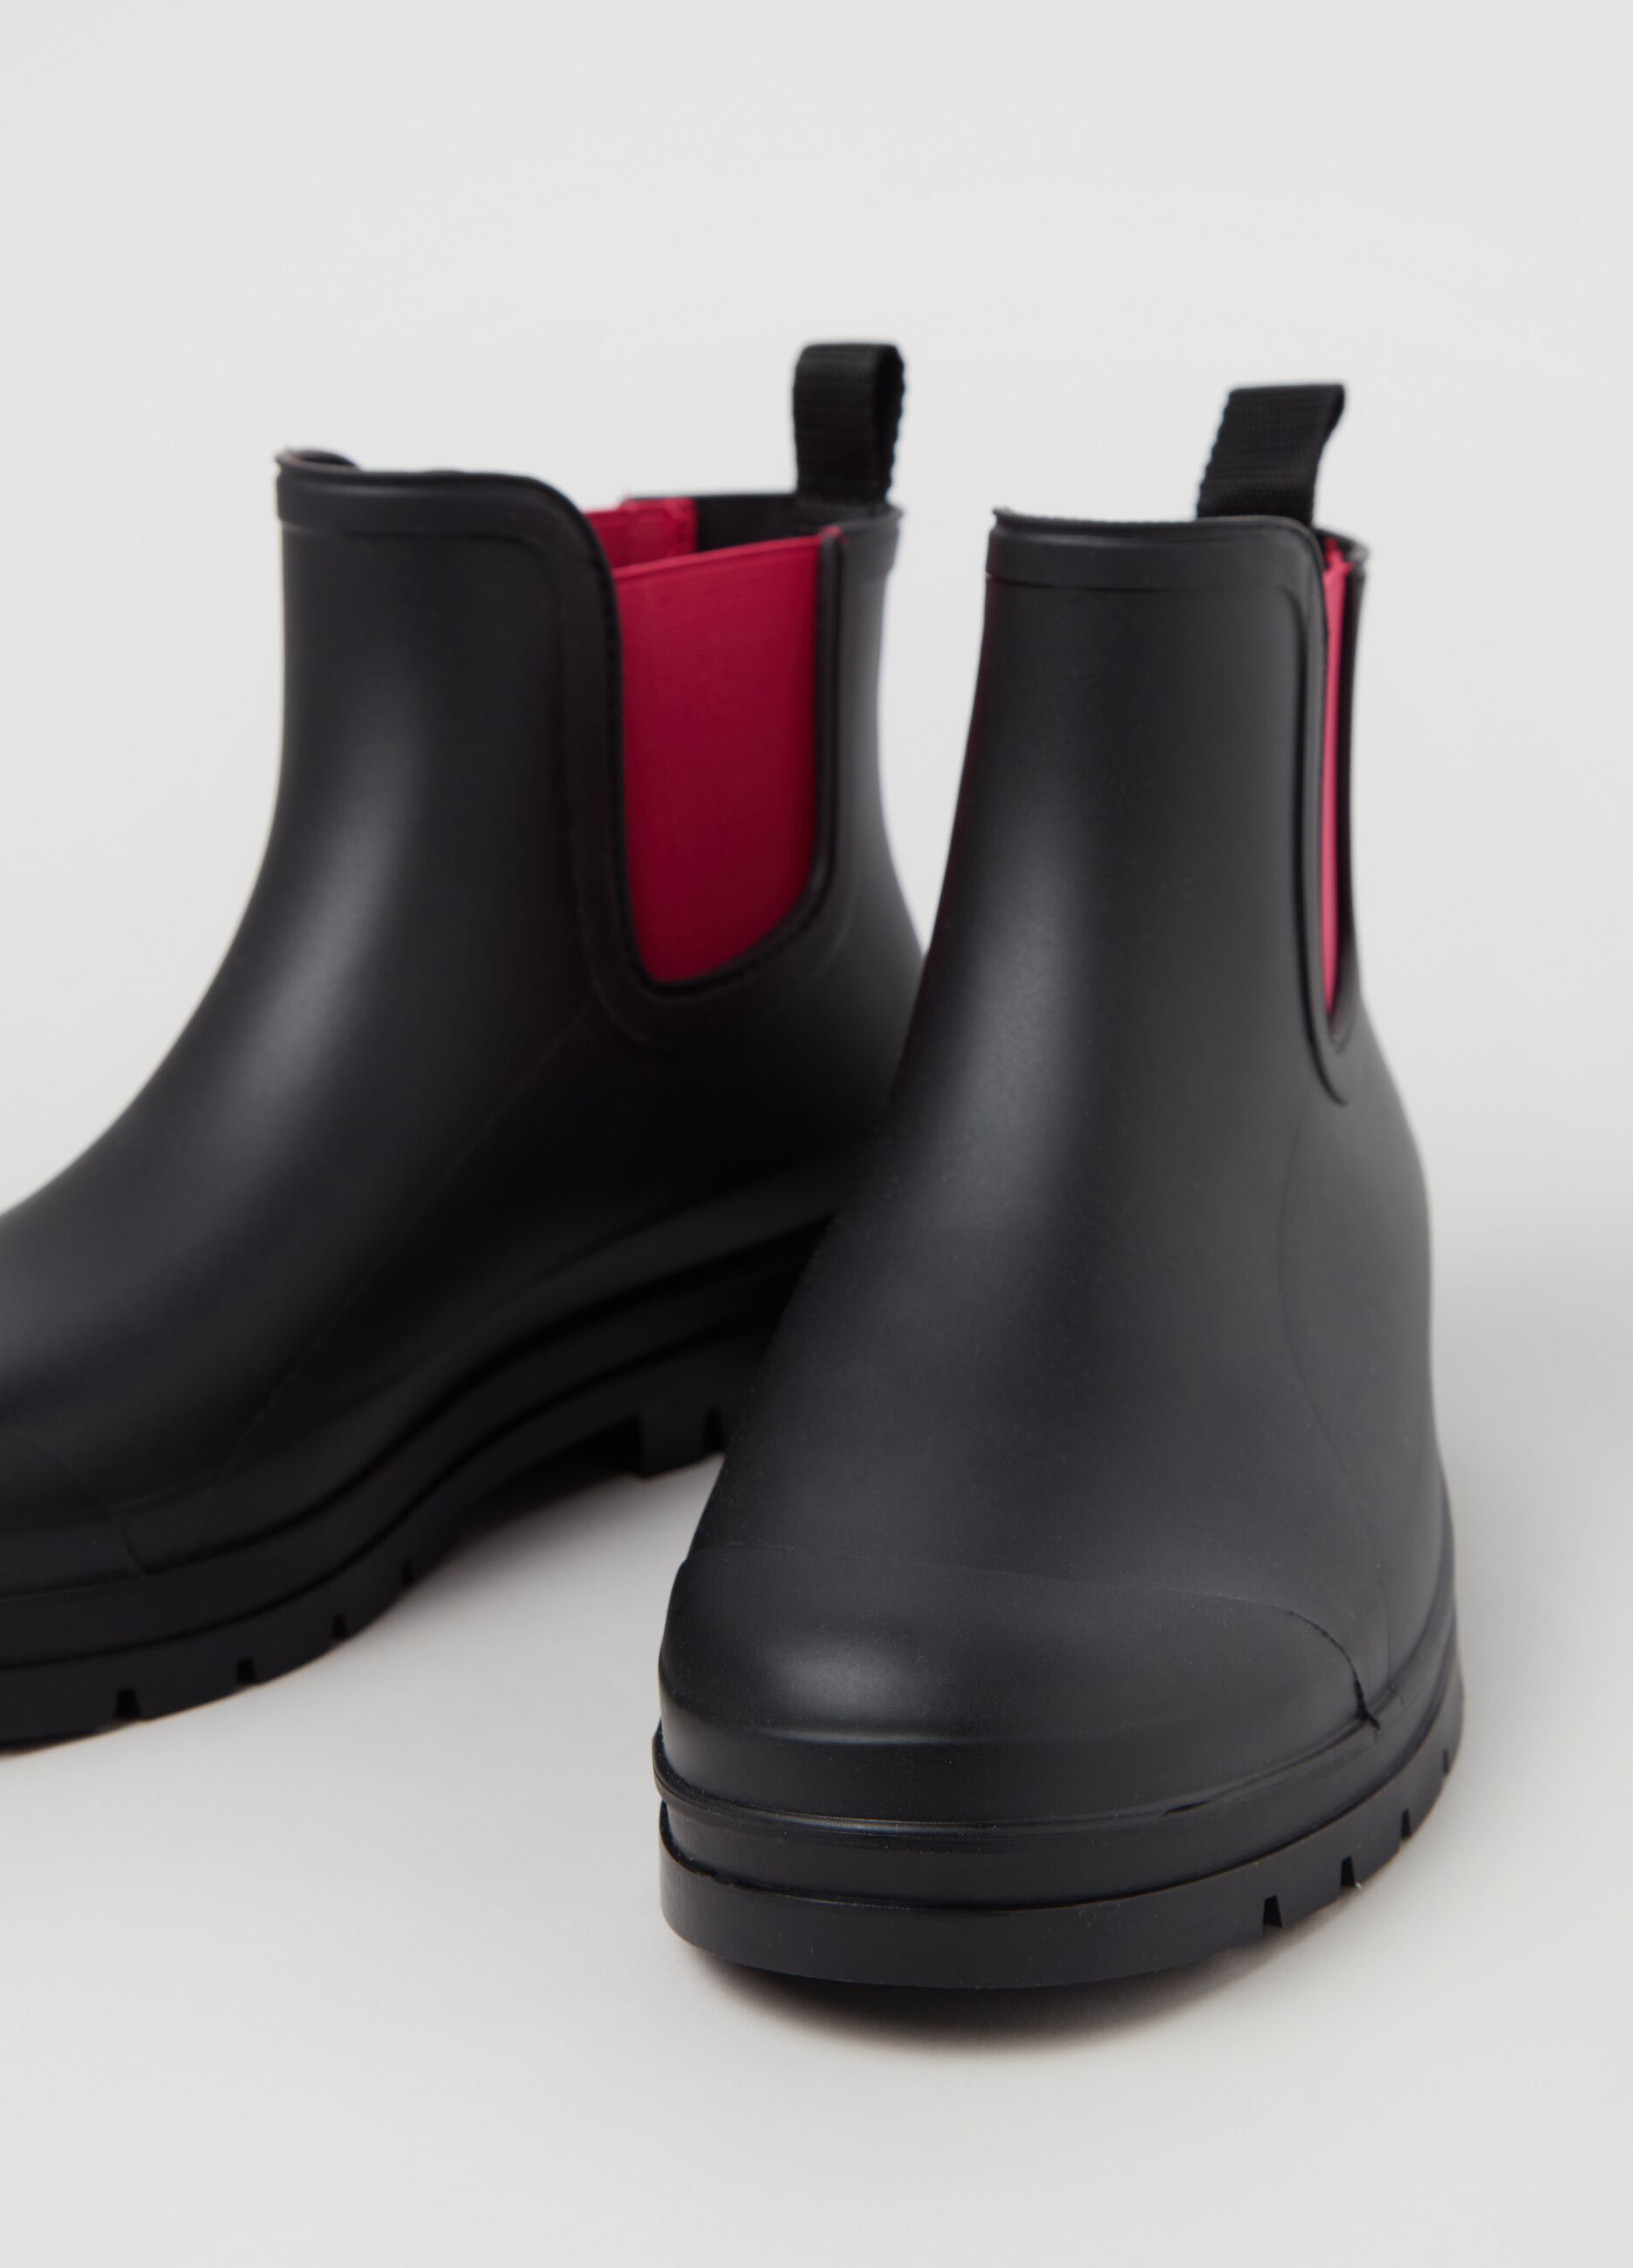 Waterproof boots with contrasting colour bands